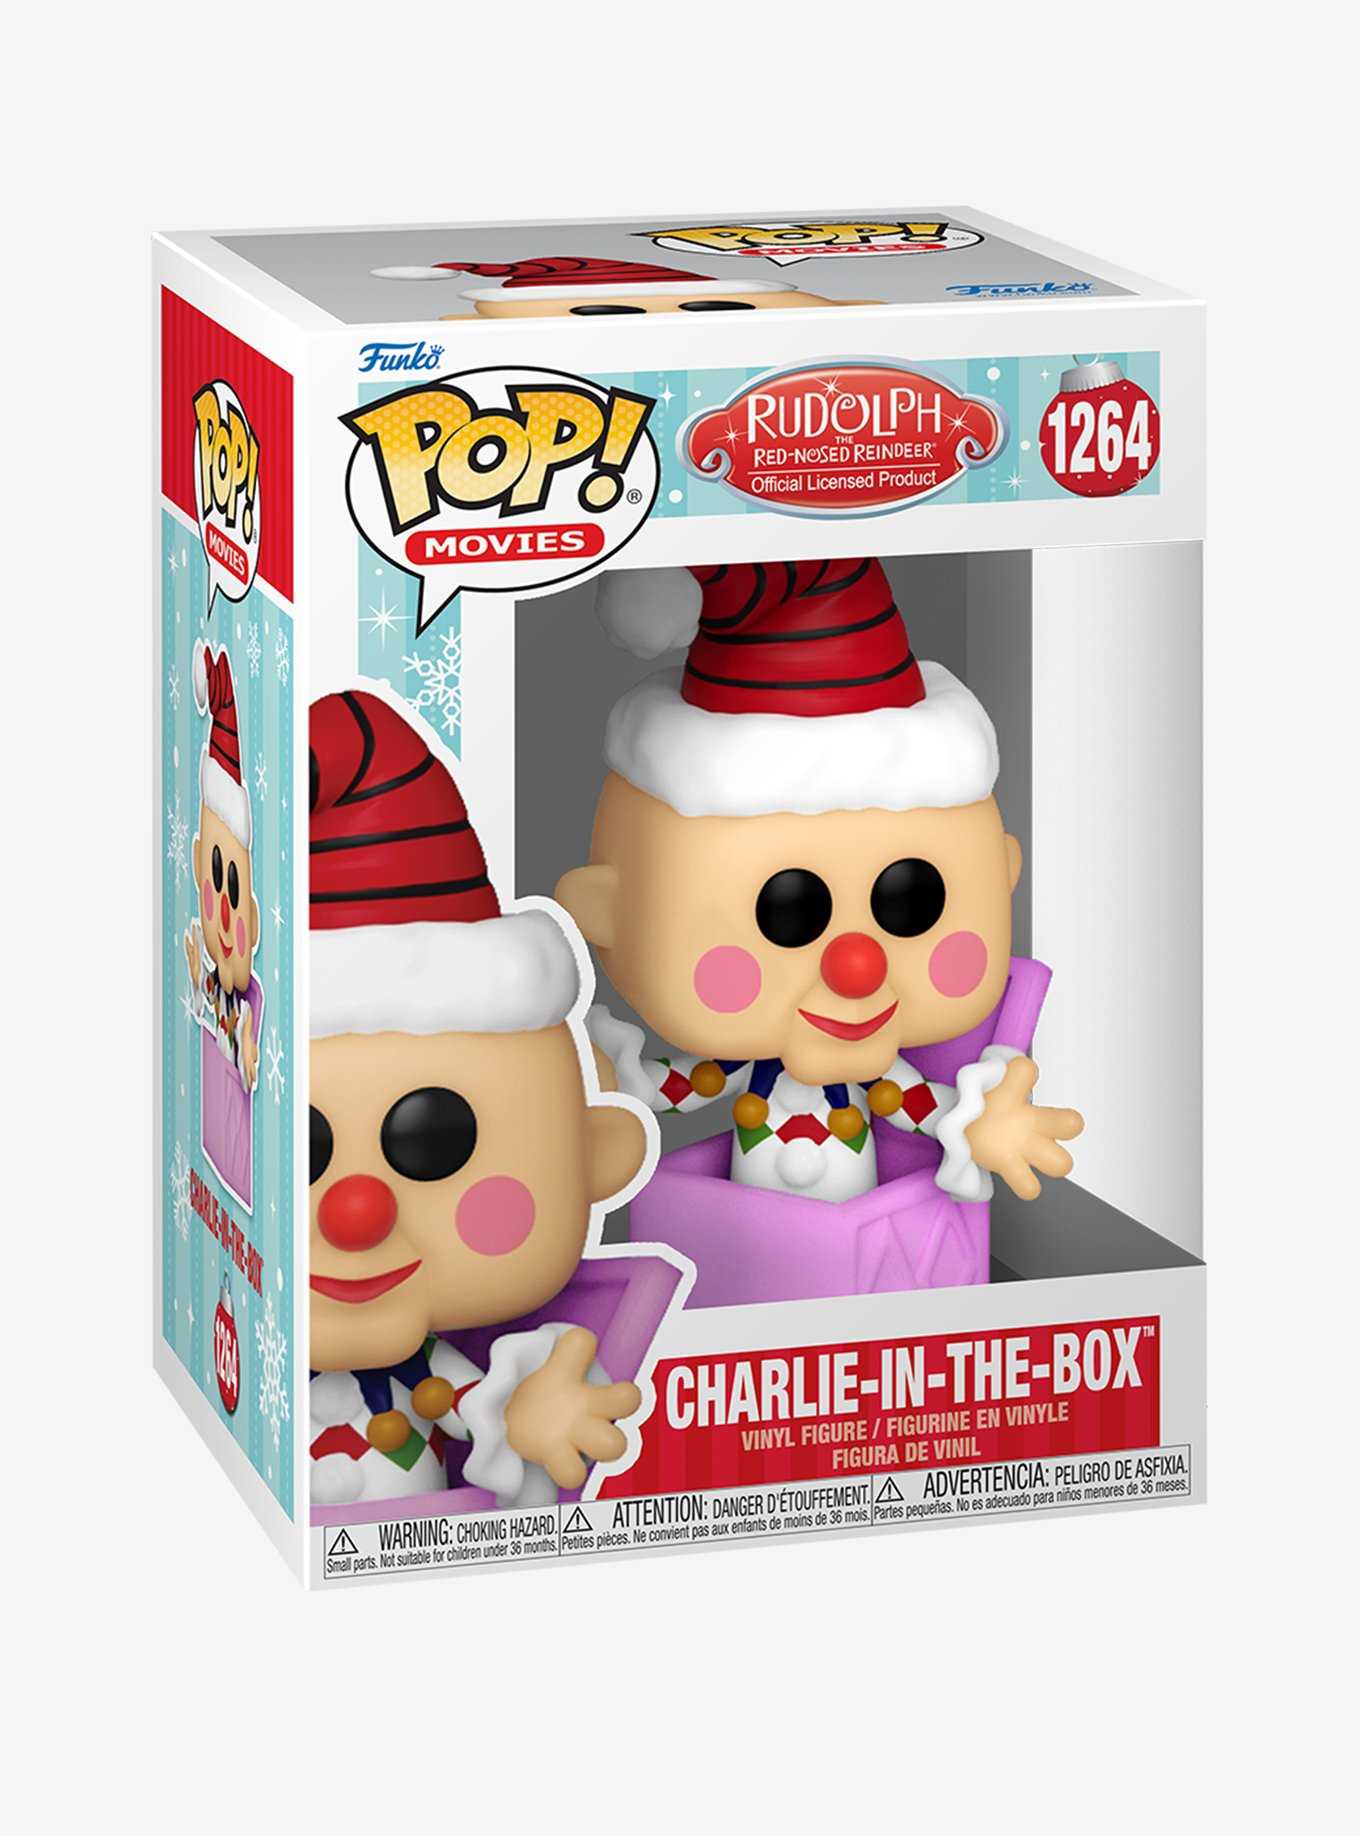 Funko Rudolph The Red-Nosed Reindeer Pop! Movies Charlie-In-The-Box Vinyl Figure, , hi-res